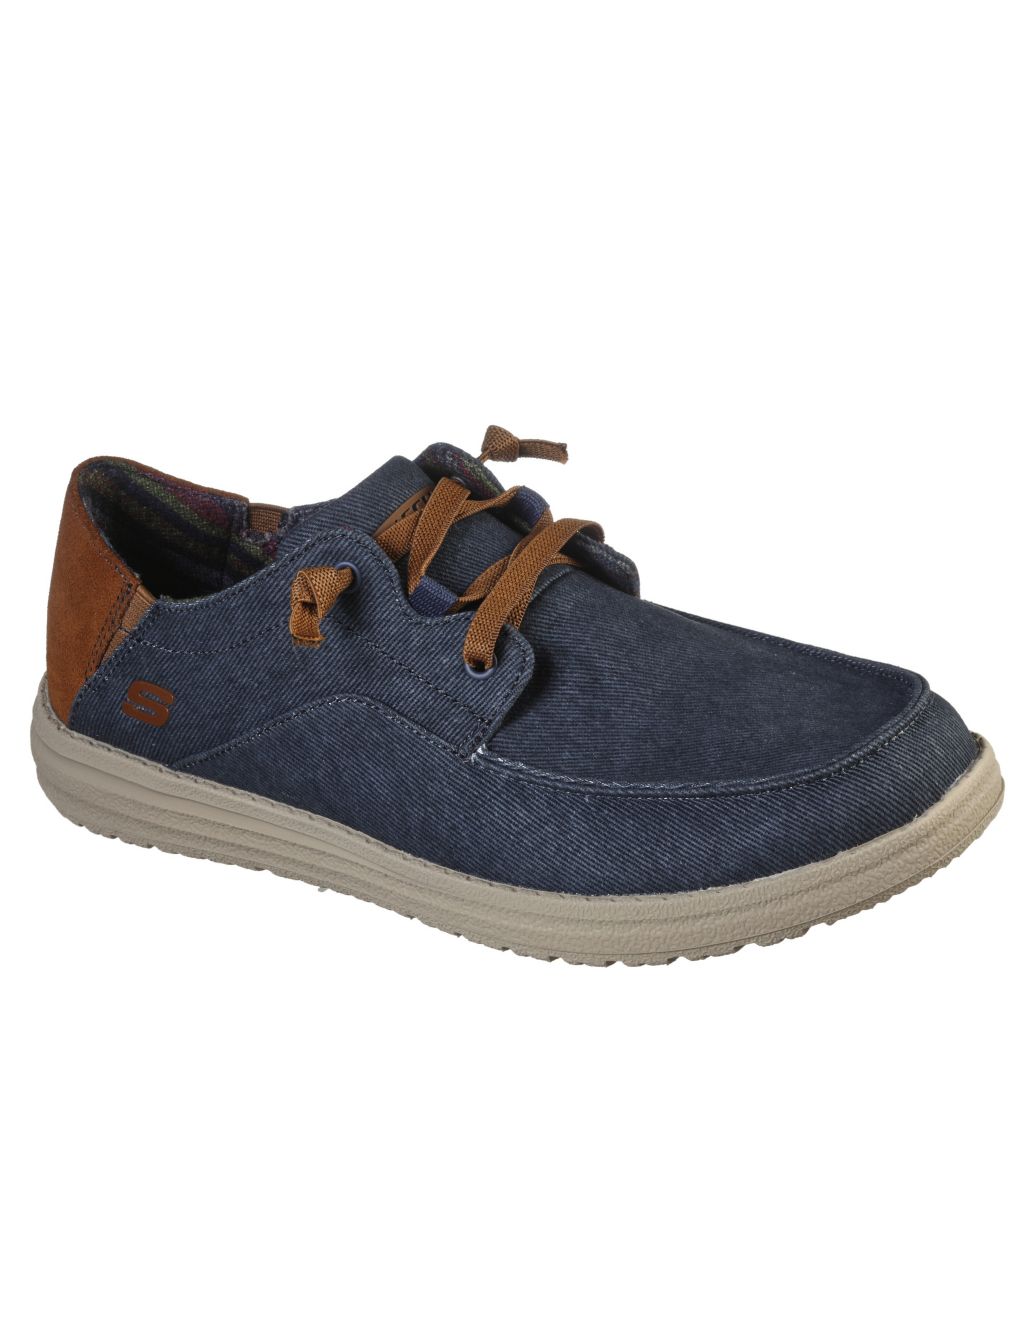 Melson Planon Boat Shoes image 2